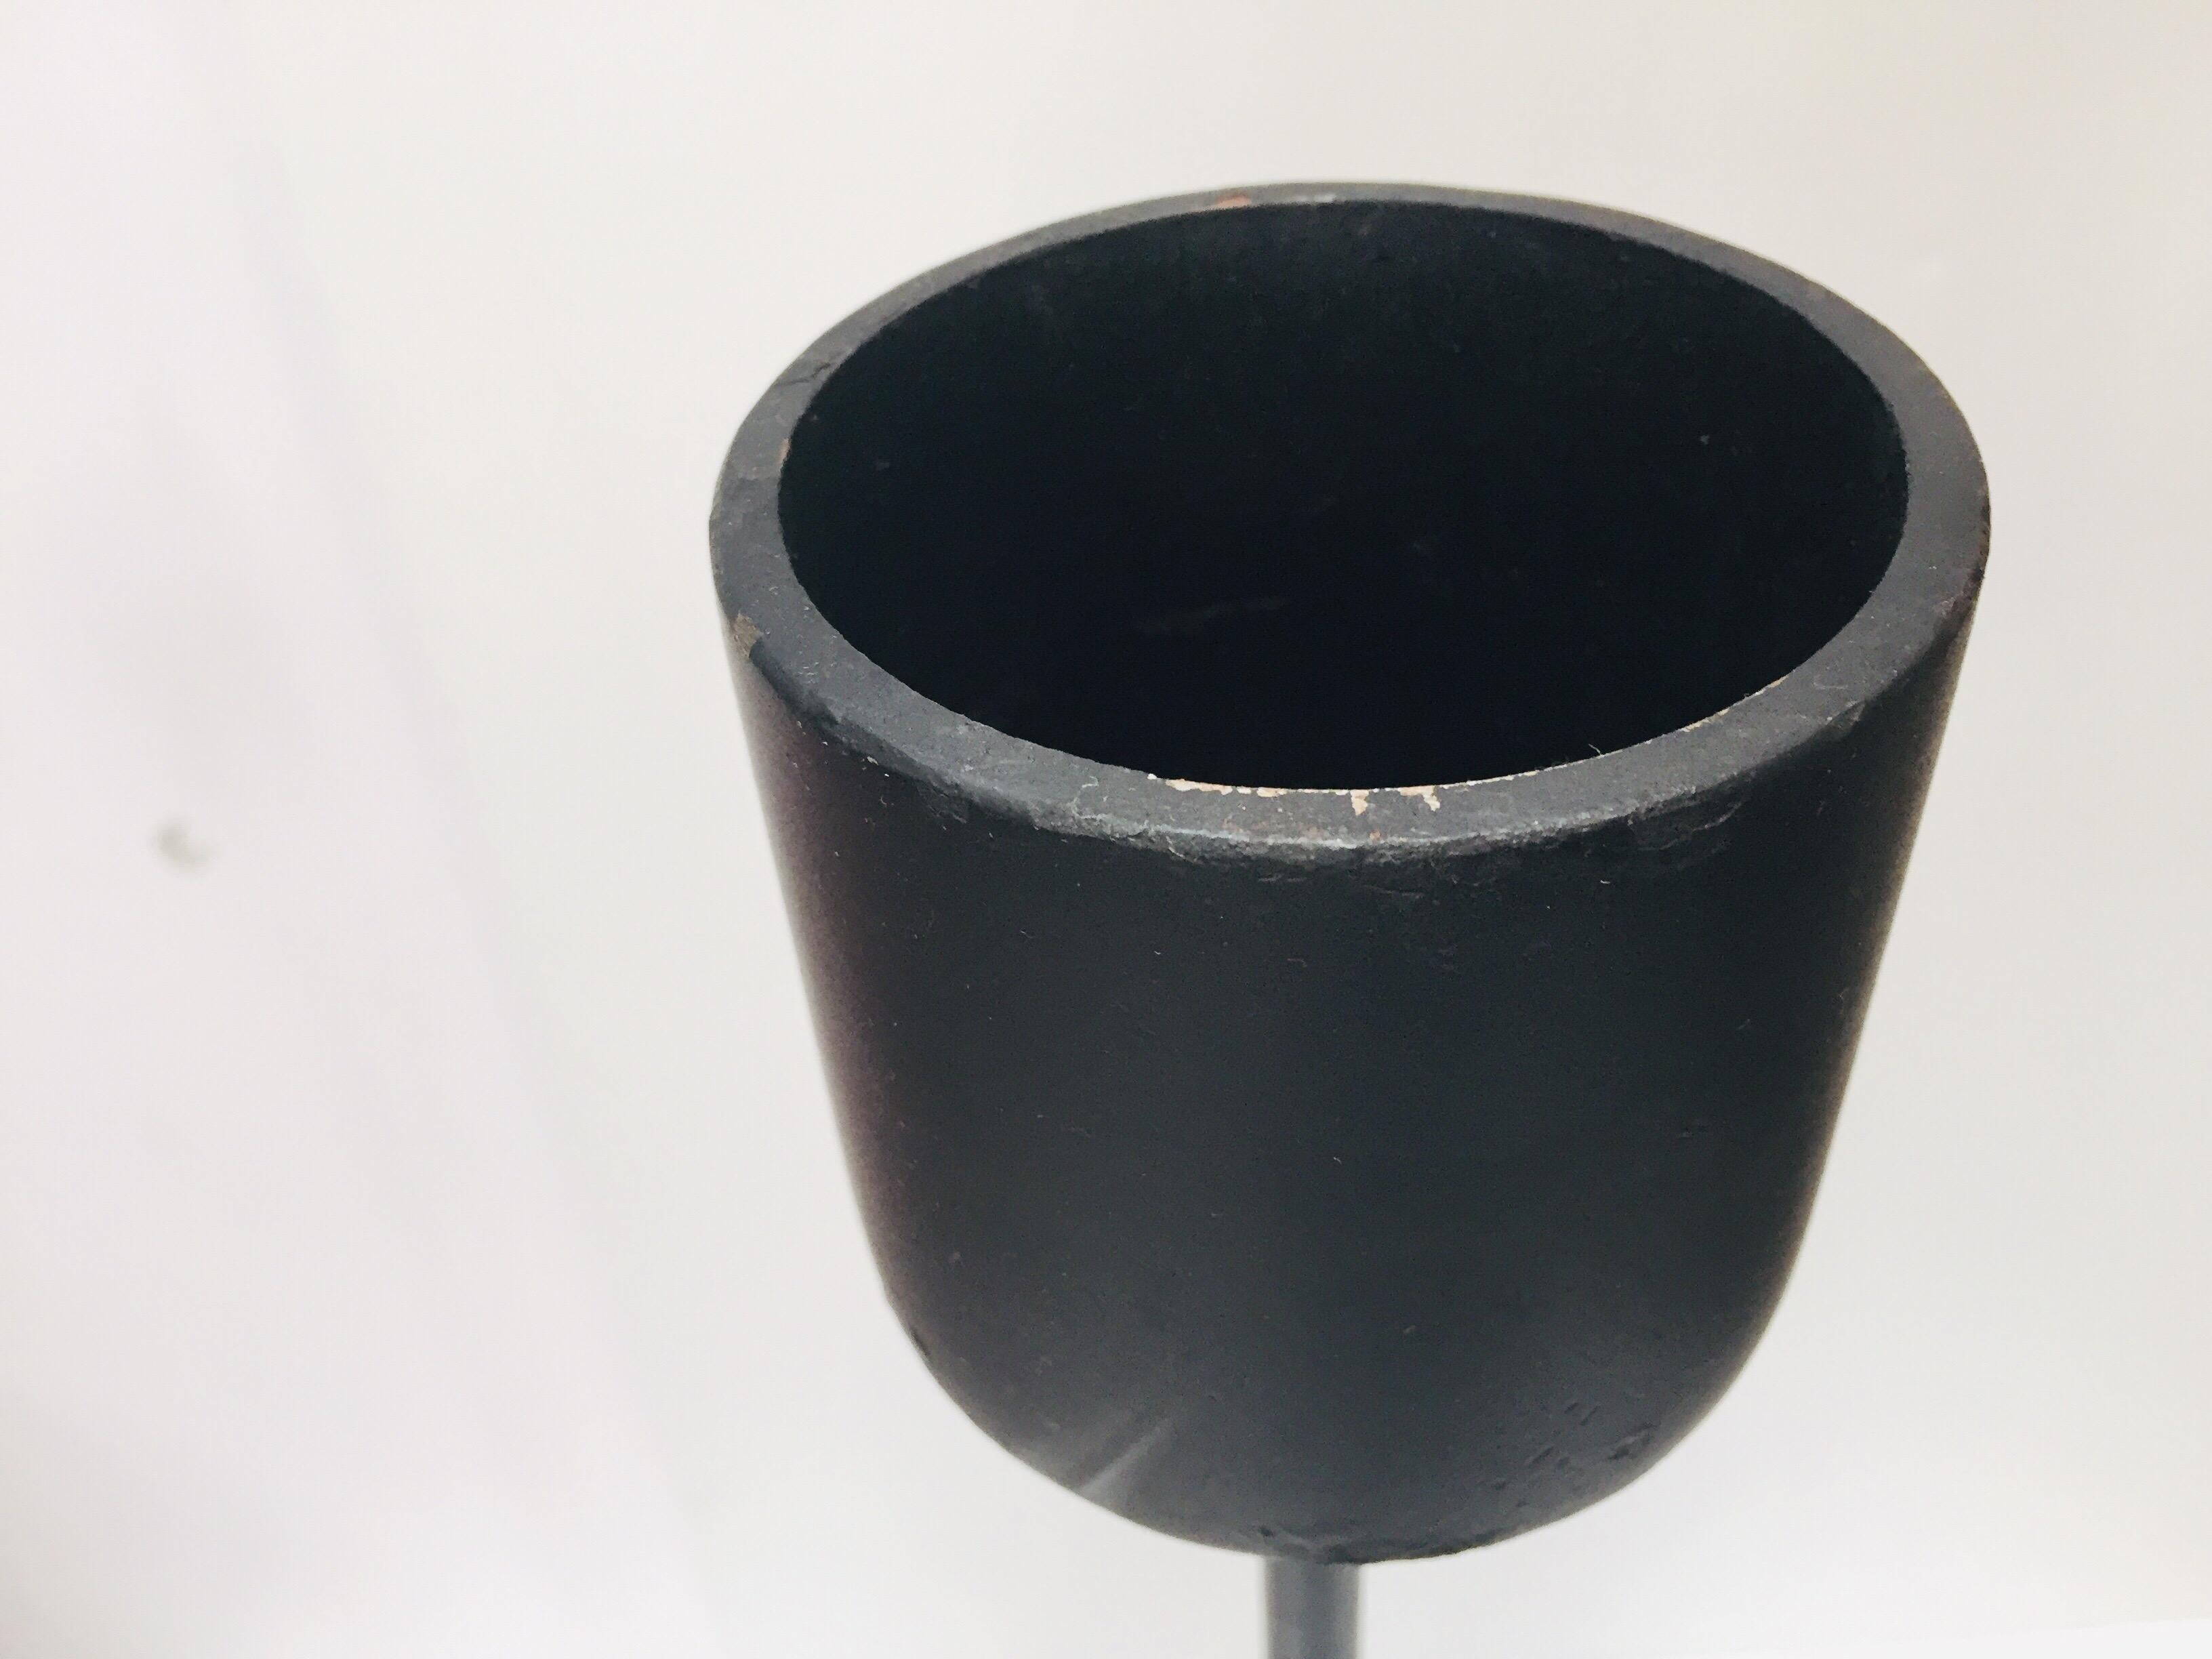 Set of two large contemporary Minimalist black metal candleholders.
The simple Minimalist modern candle stand is finished in black and hold a 3